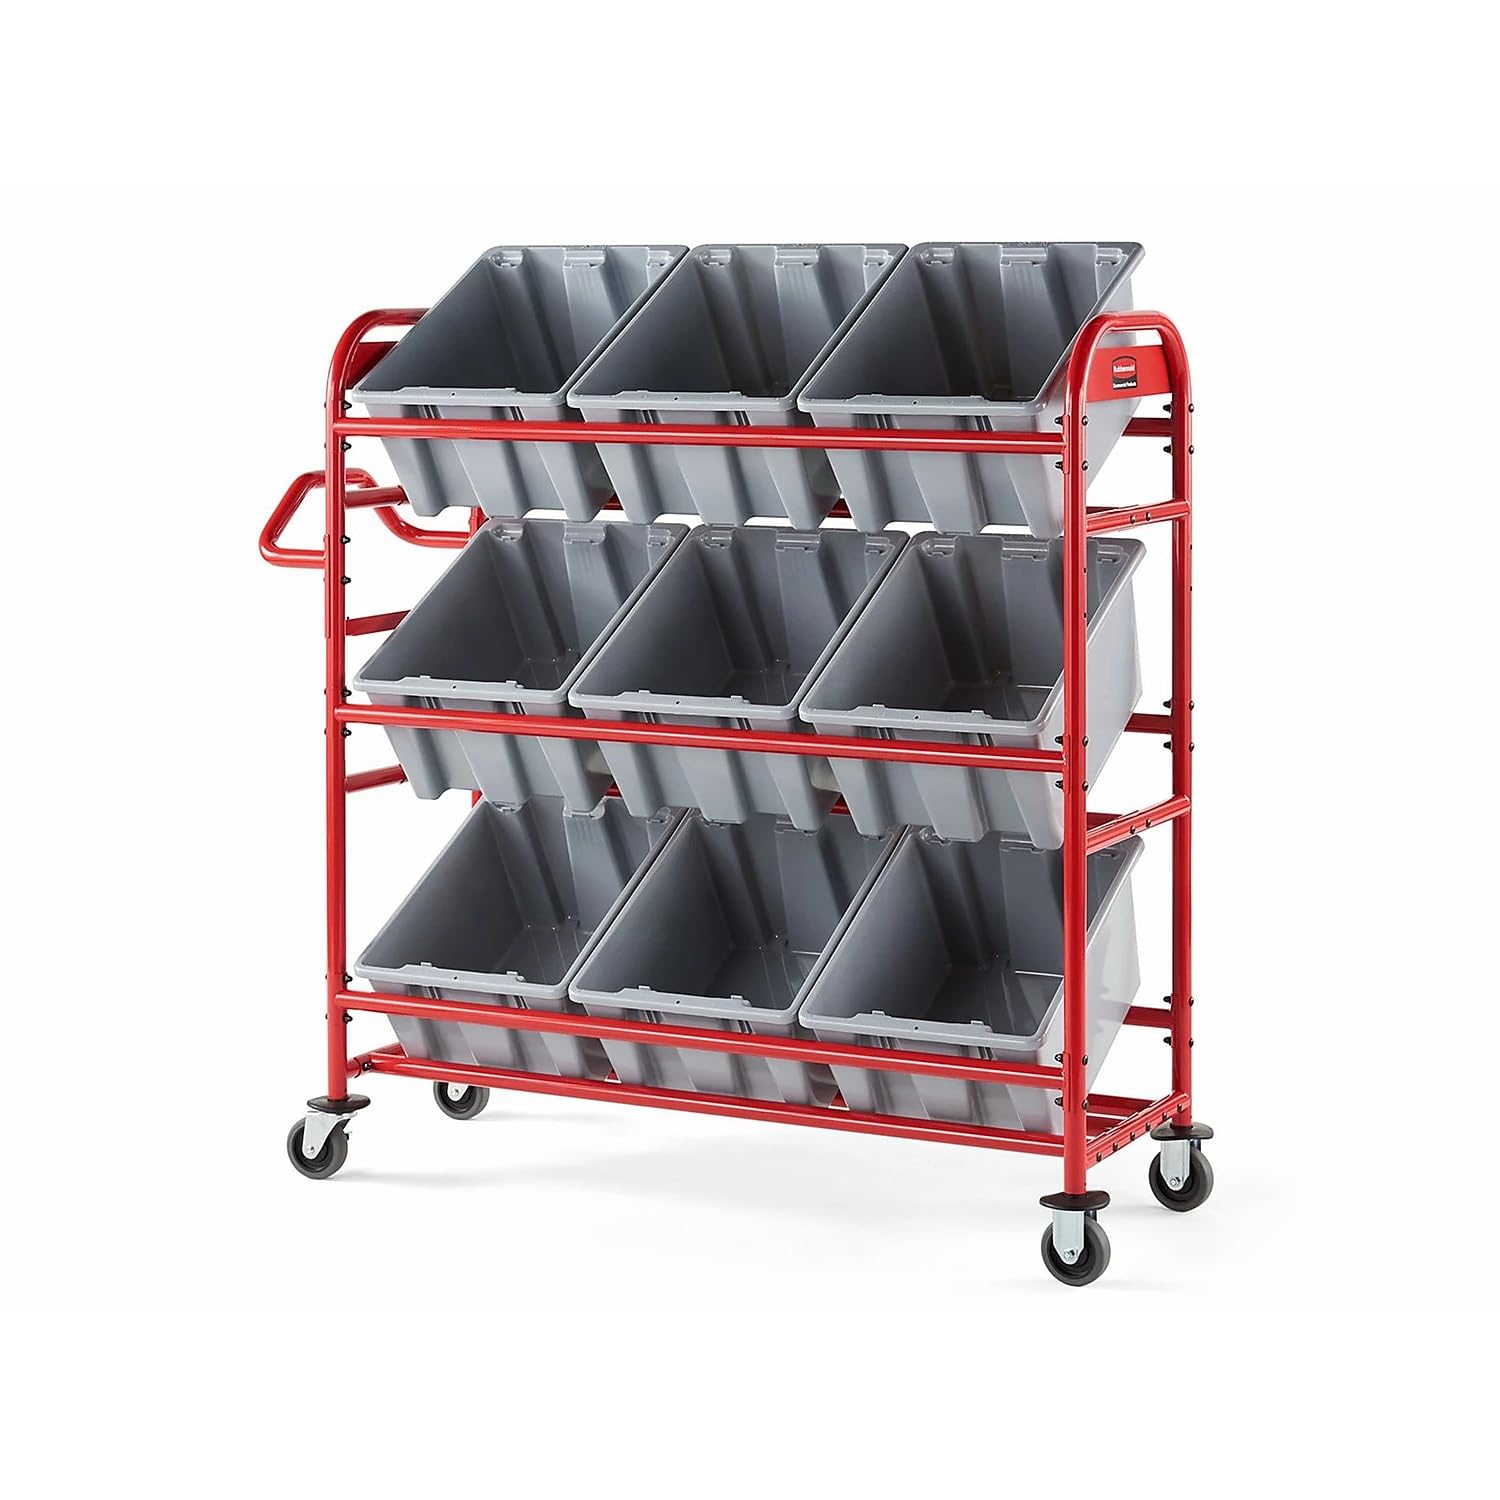 Rubbermaid Commerical Products Tote Picking Cart Tote Storage Bracket, Holds up to 18 Totes